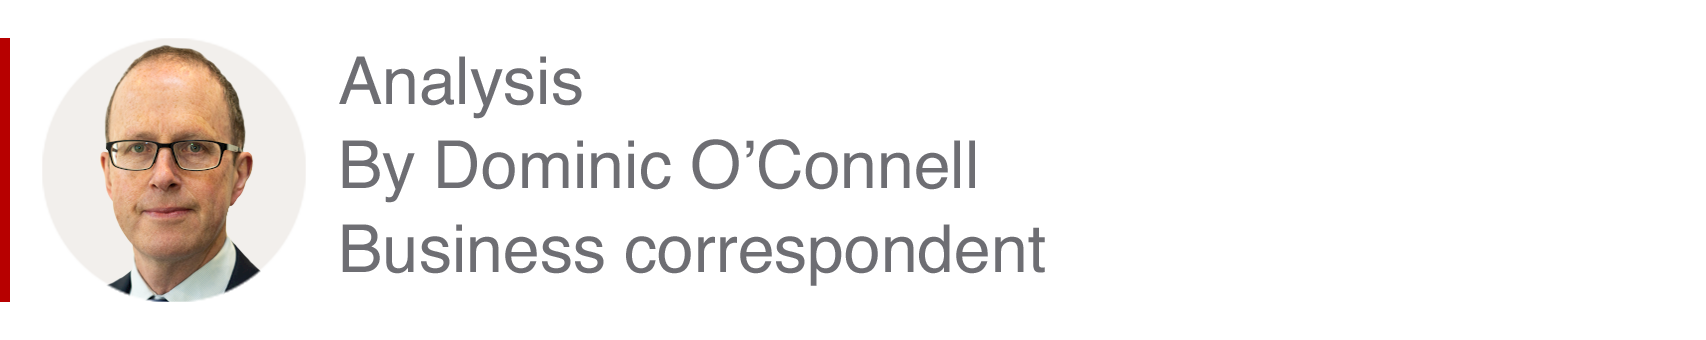 Analysis box by Dominic O'Connell, business correspondent